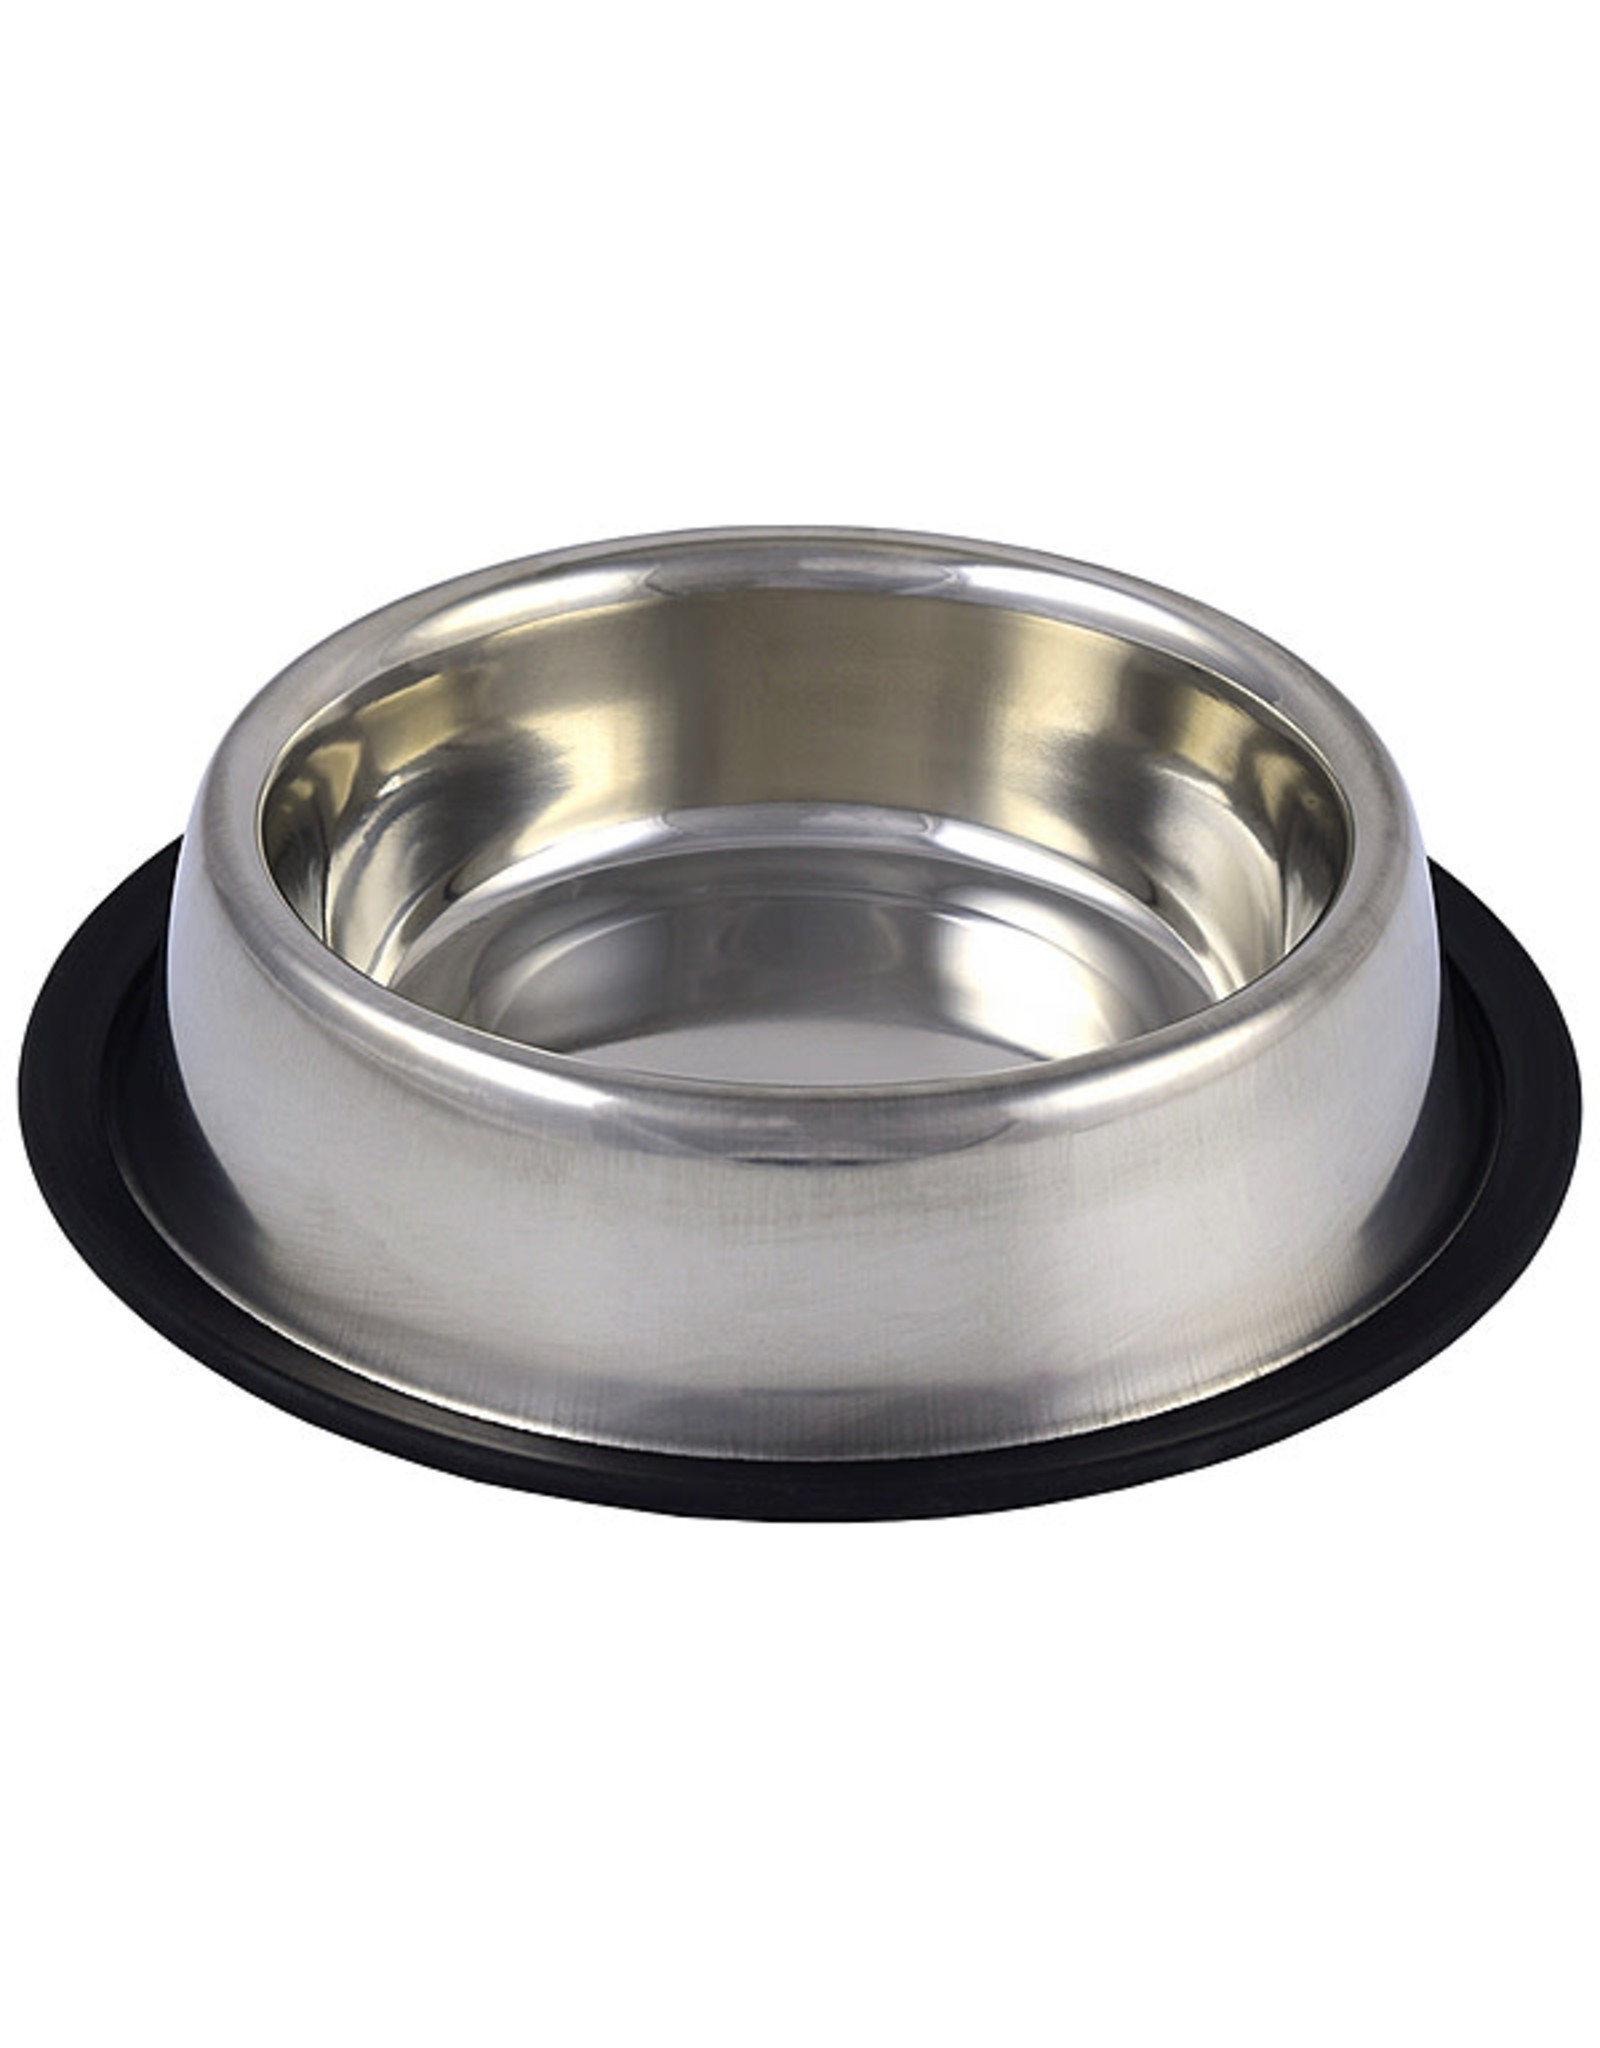 Unleashed Non Skid Stainless Steel Bowl 24 OZ